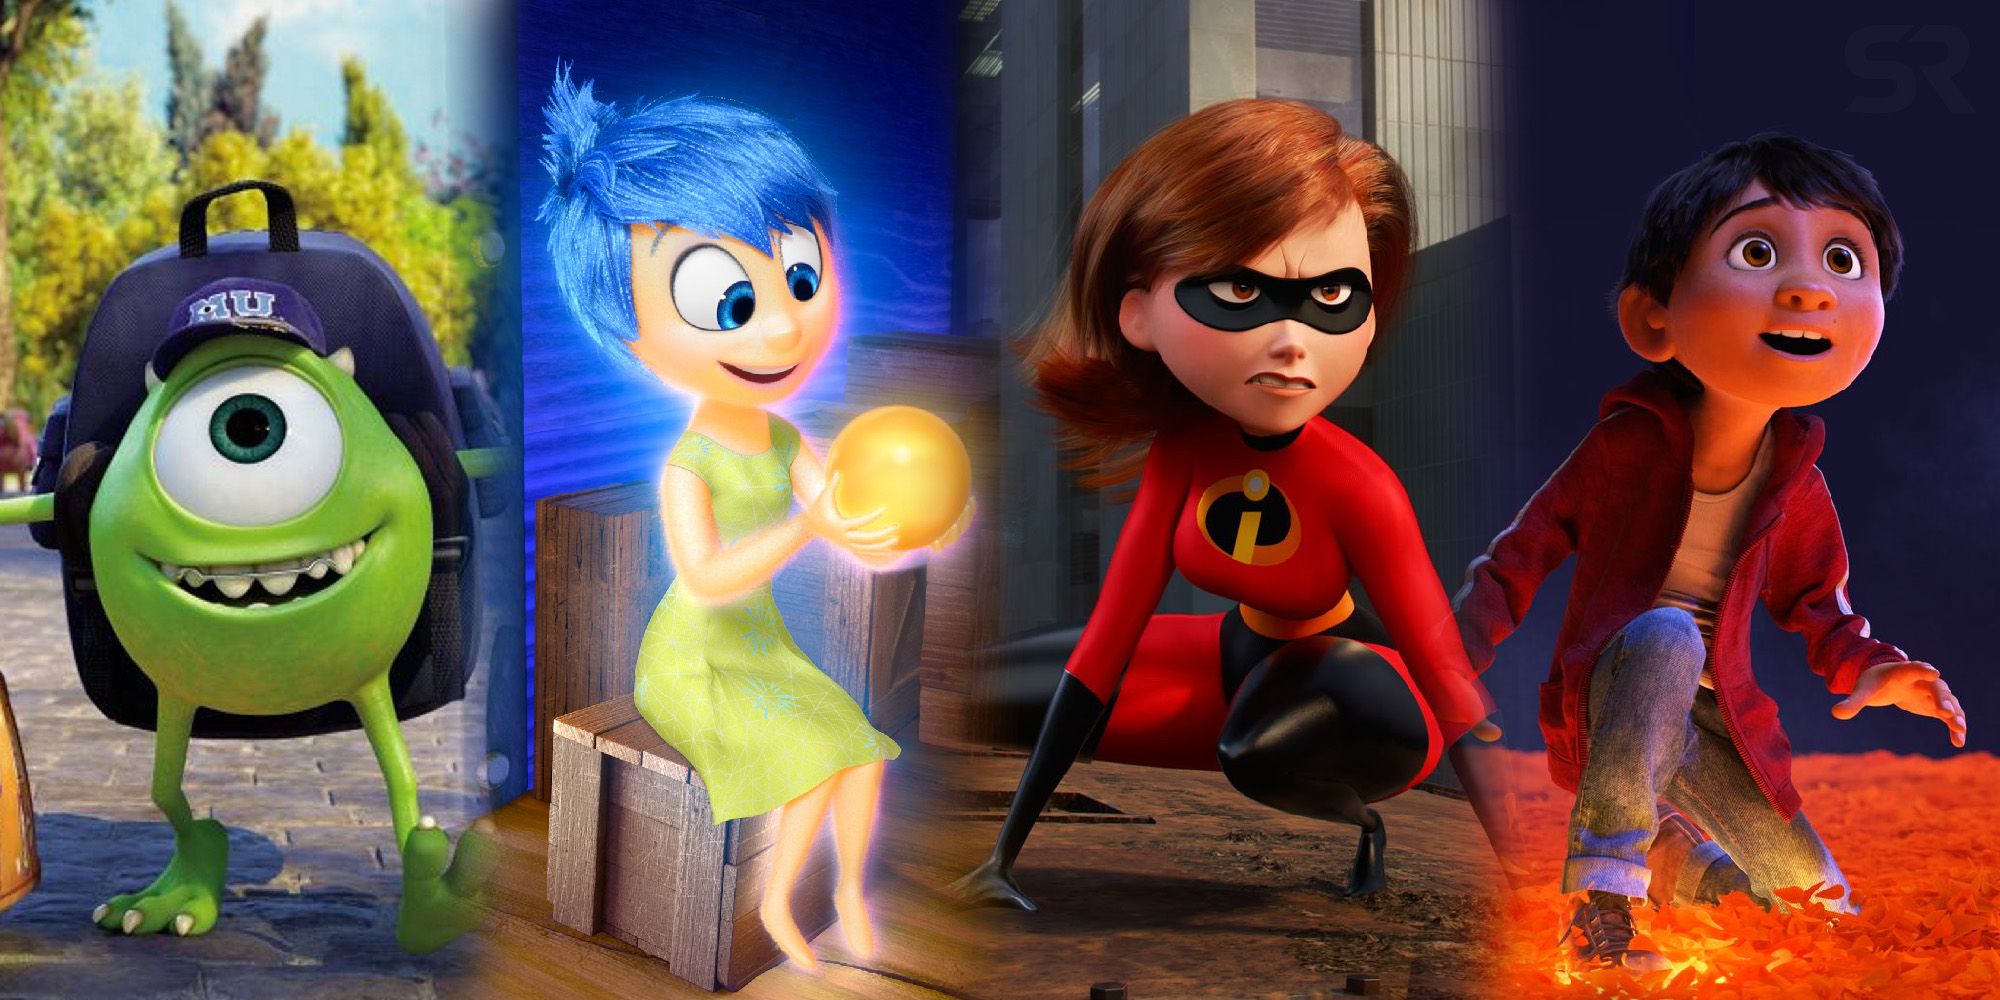 Every Pixar Movie Ranked From Worst To Best